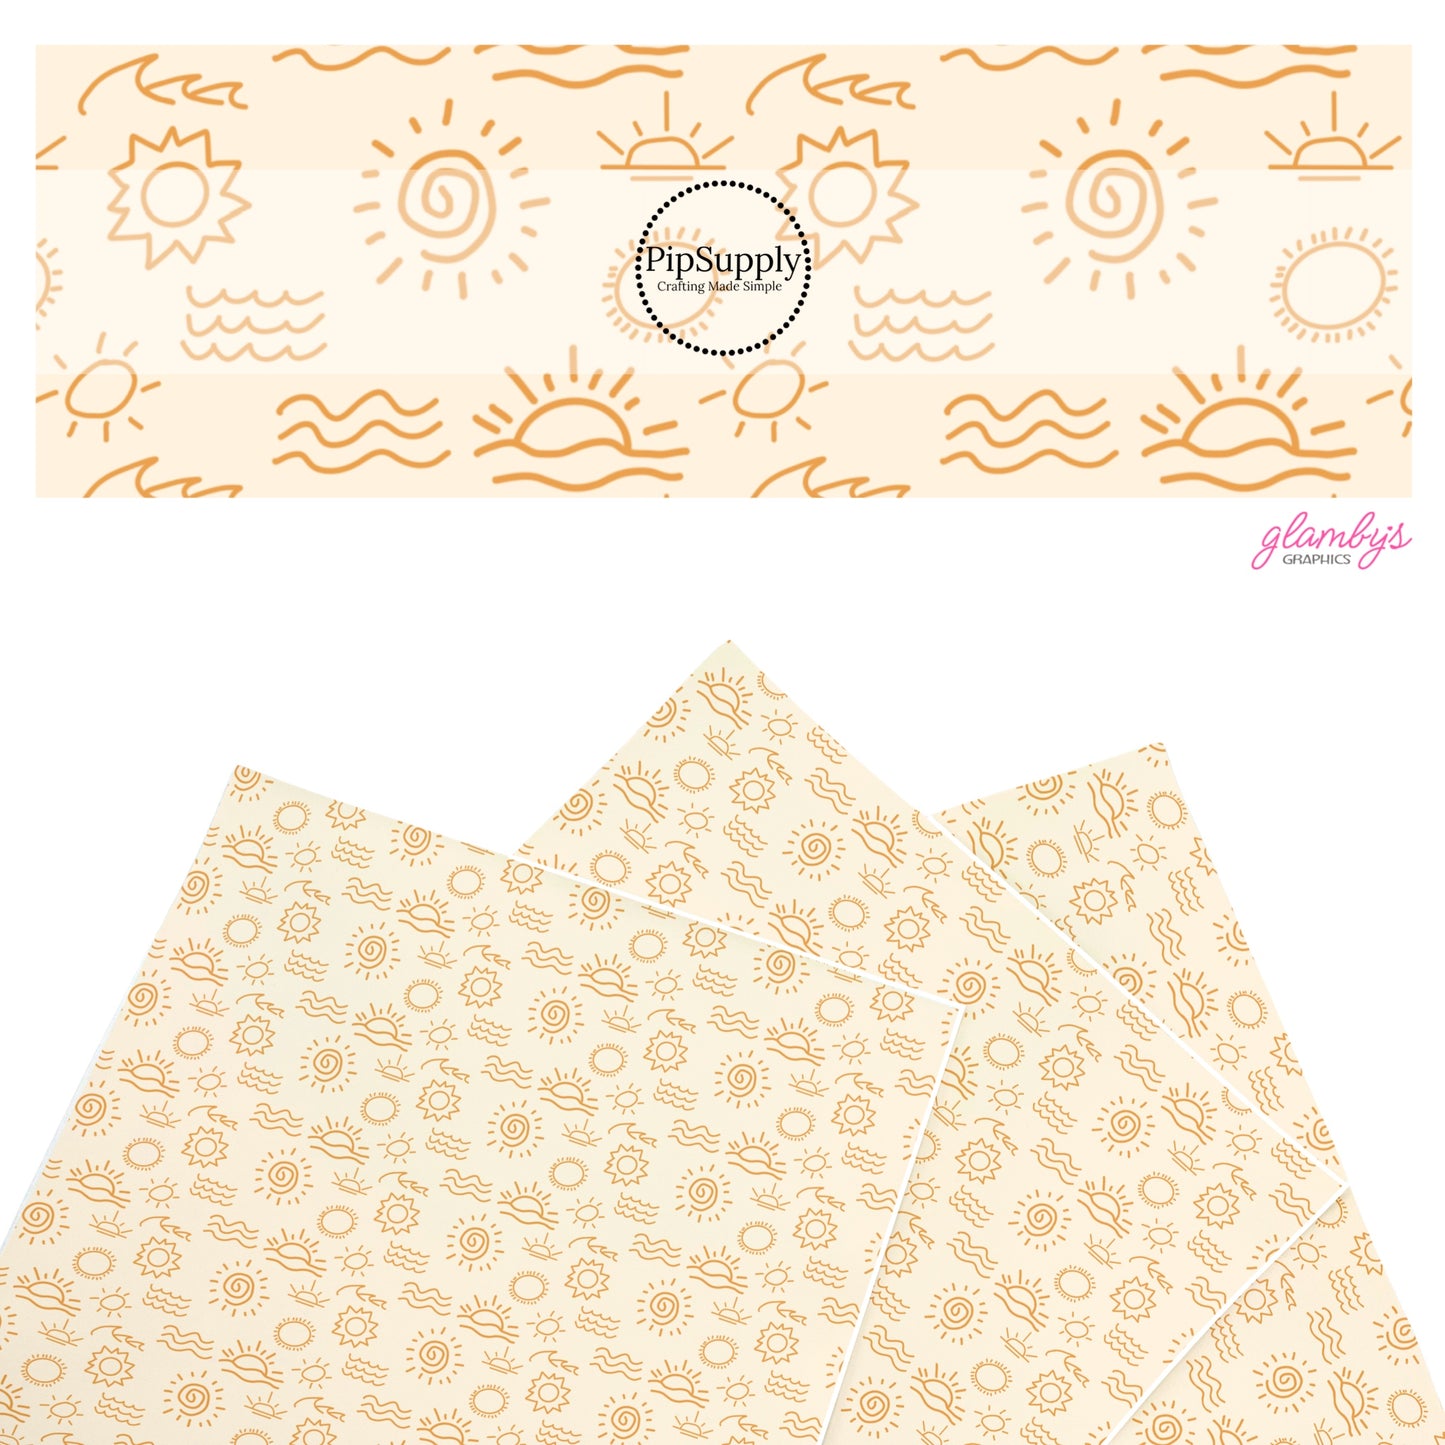 These tropical faux leather sheets contain the following design elements: sketch of waves and suns on cream. Our CPSIA compliant faux leather sheets or rolls can be used for all types of crafting projects.